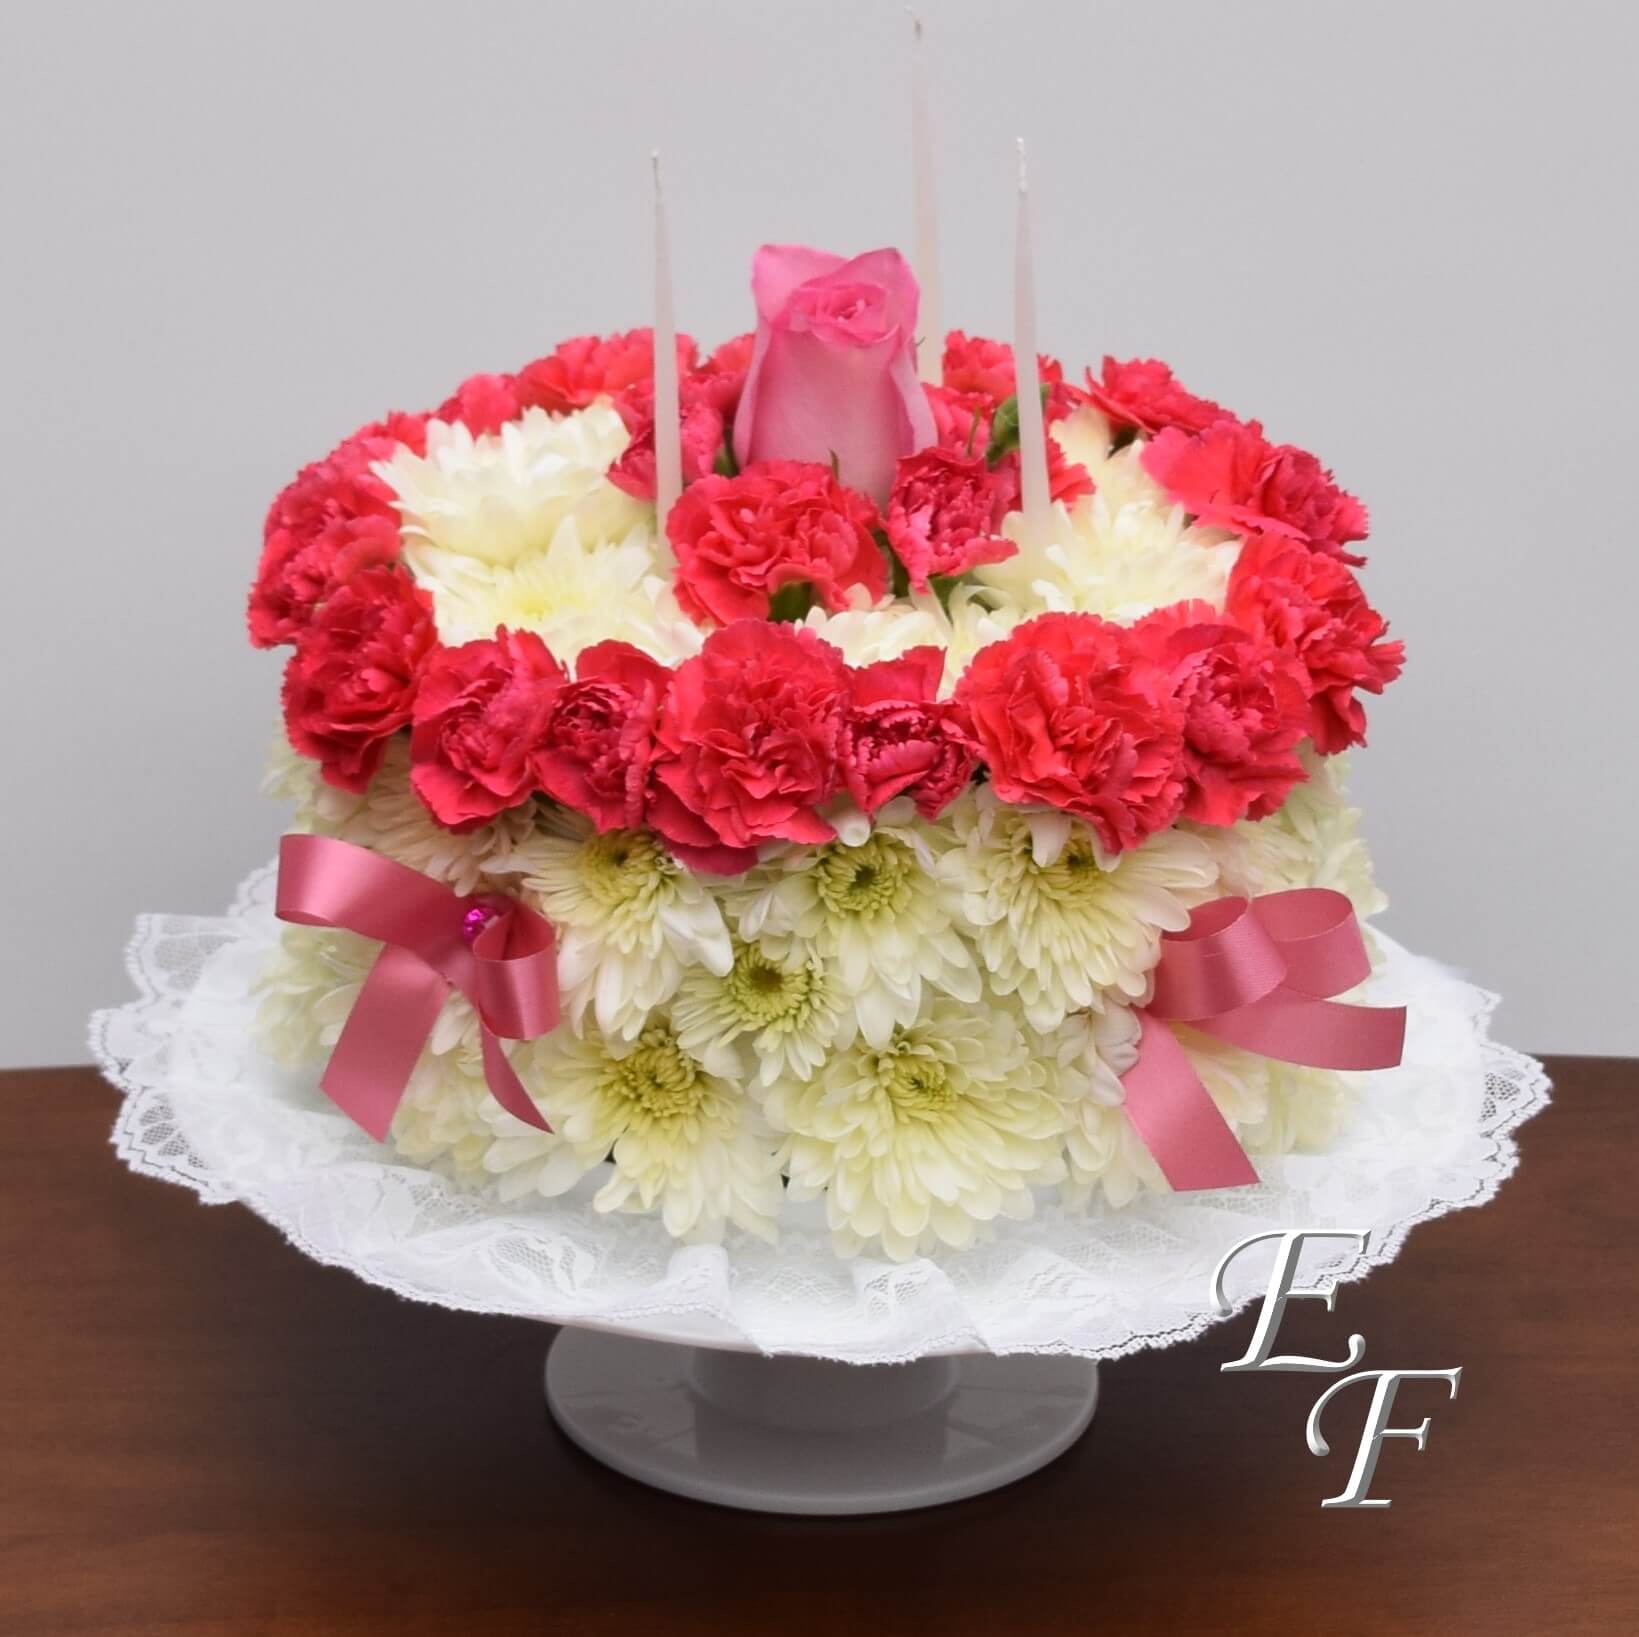 Floral arrangement shaped like a birthday cake